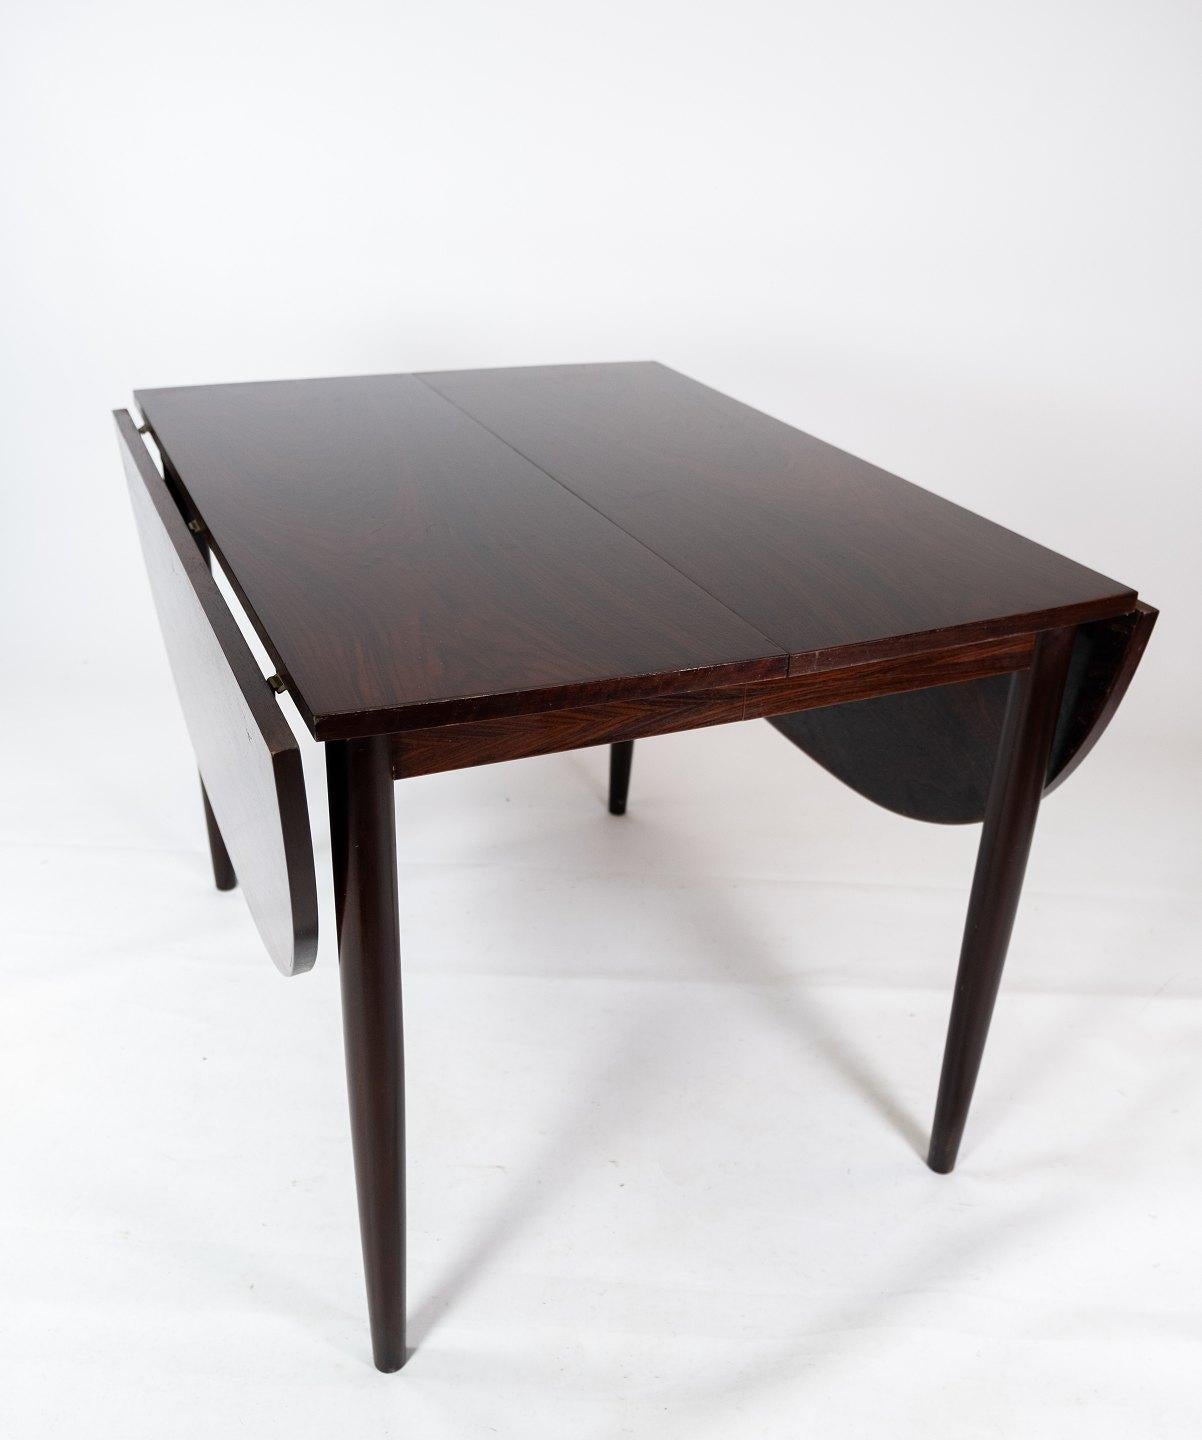 This dining table in rosewood, designed by Arne Vodder in the 1960s, epitomizes the elegance and craftsmanship characteristic of Danish mid-century modern design.

Crafted from luxurious rosewood, renowned for its rich hues and distinctive grain